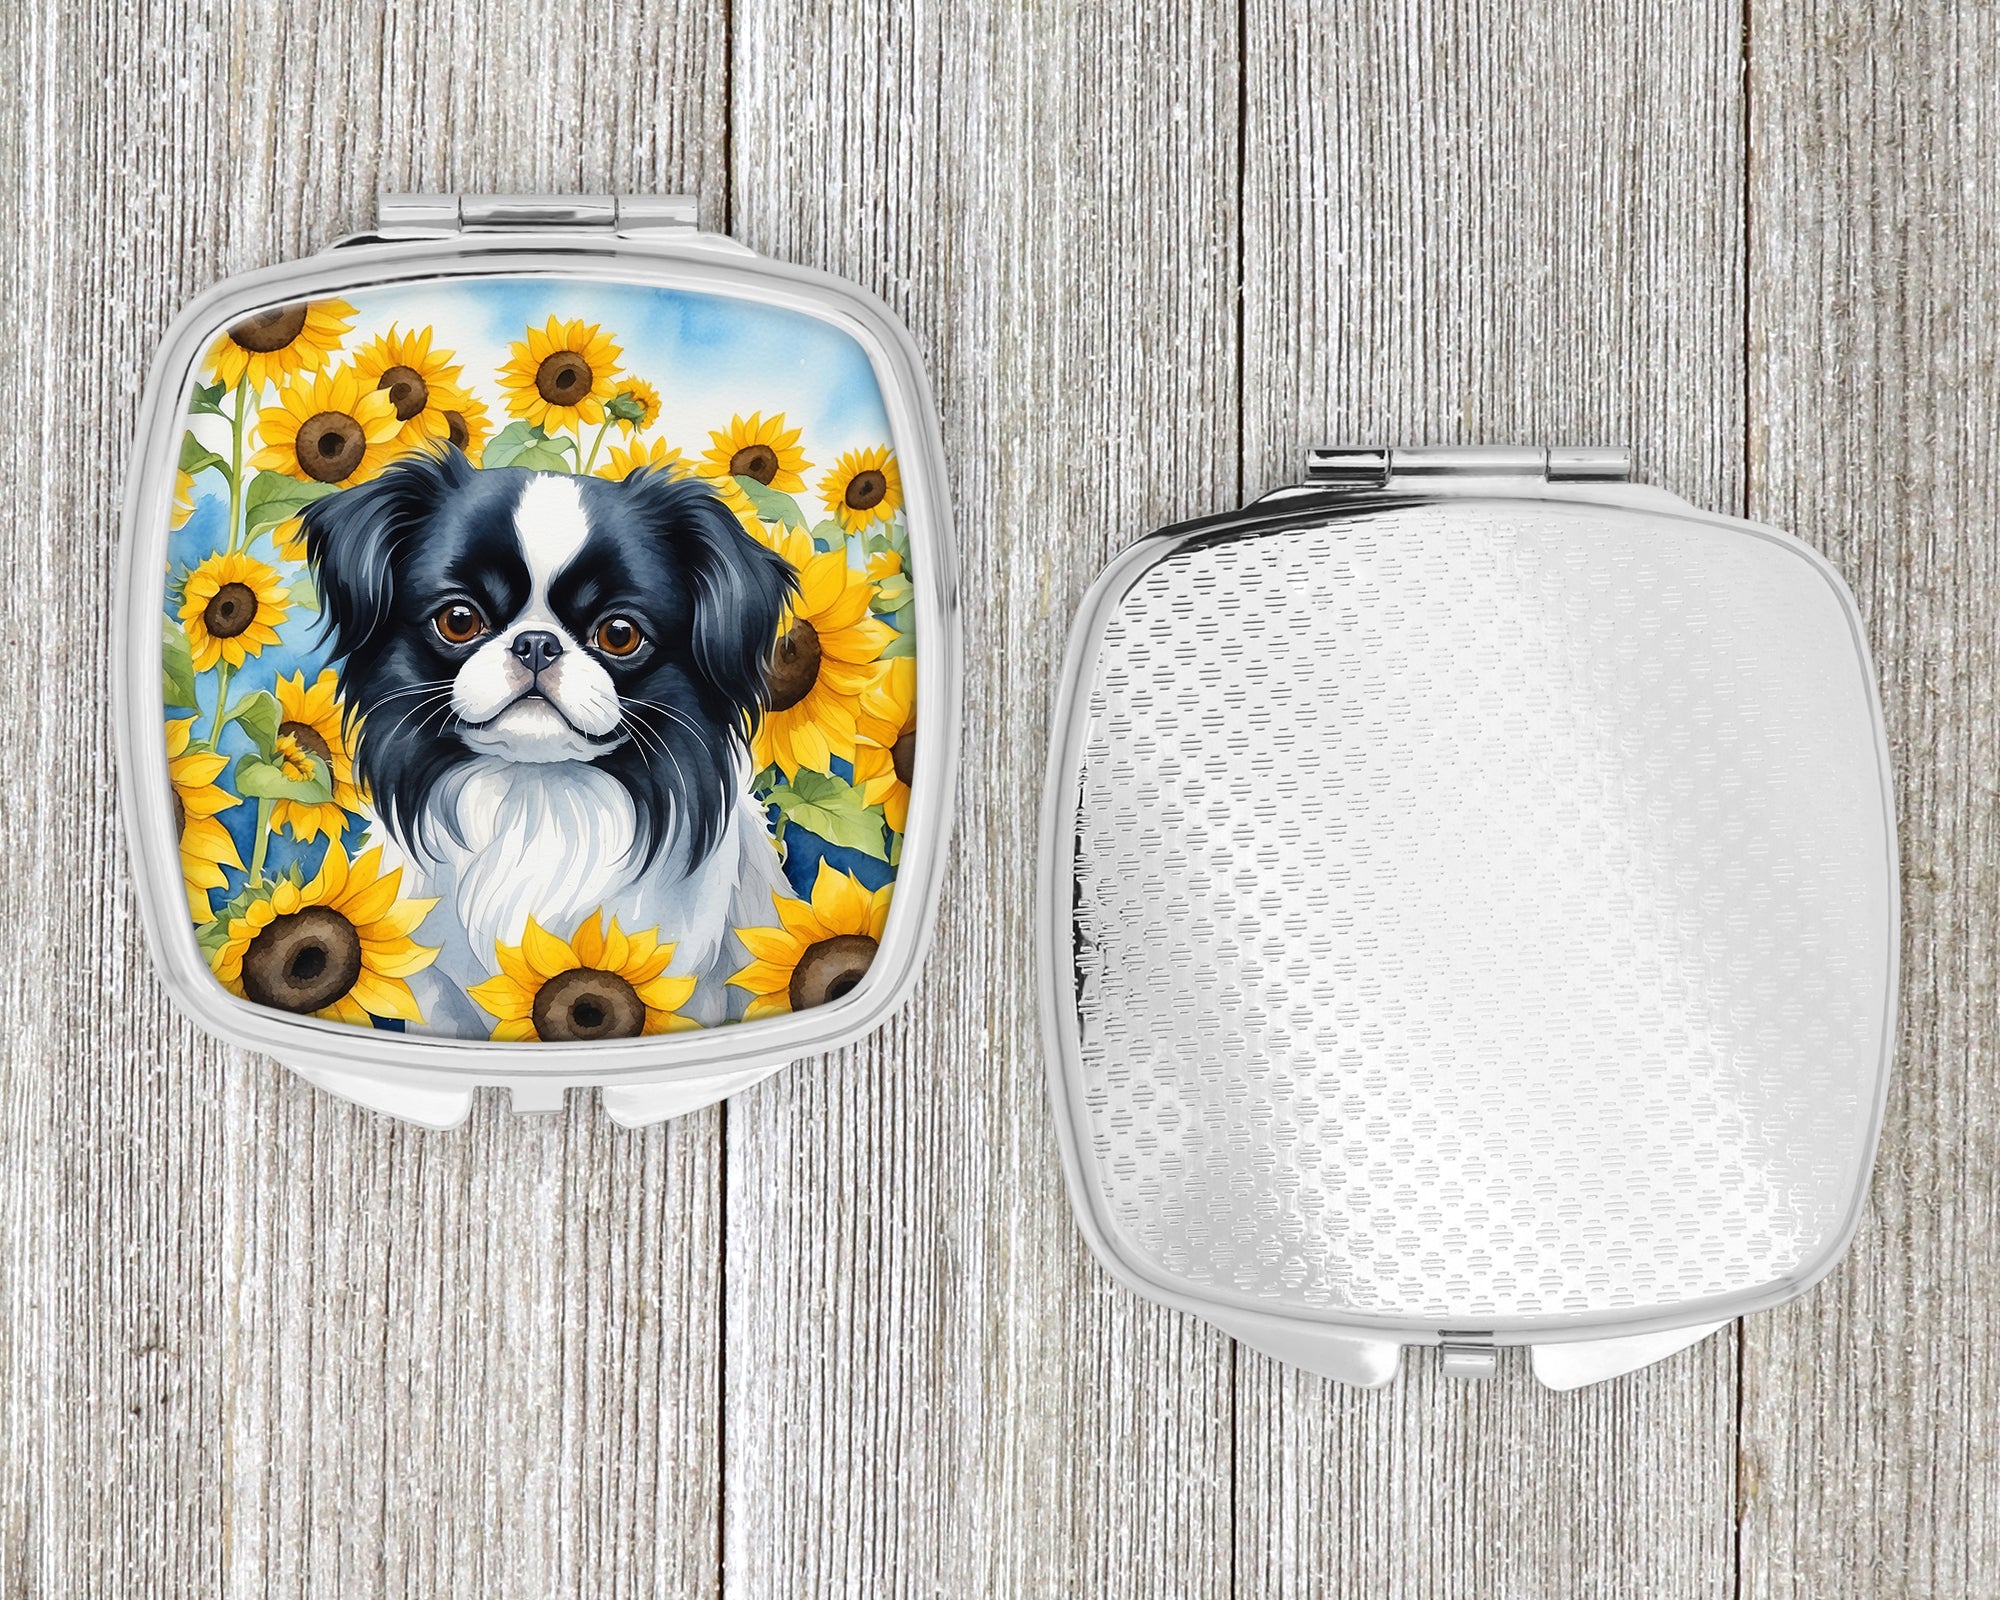 Japanese Chin in Sunflowers Compact Mirror